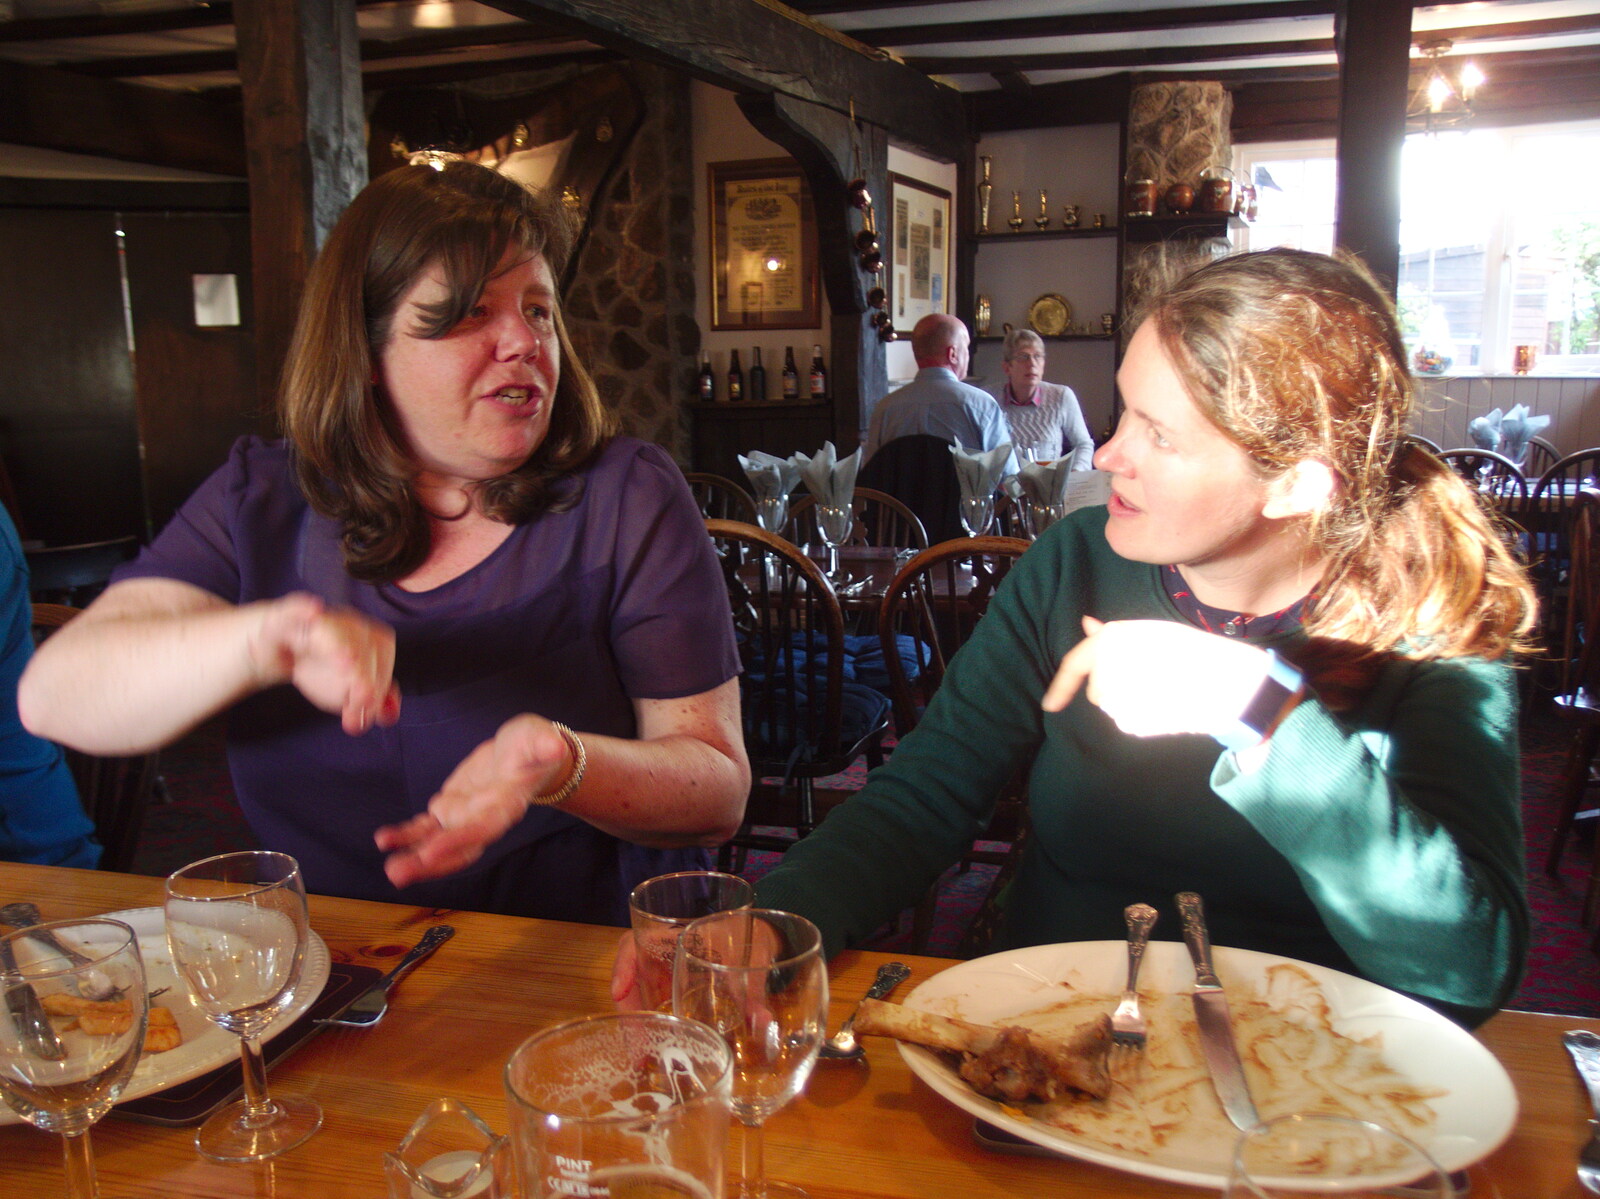 Sis and Isobel in the Cobley restaurant from The Tom Cobley and a Return to Haytor, Bovey Tracey, Devon - 27th May 2019